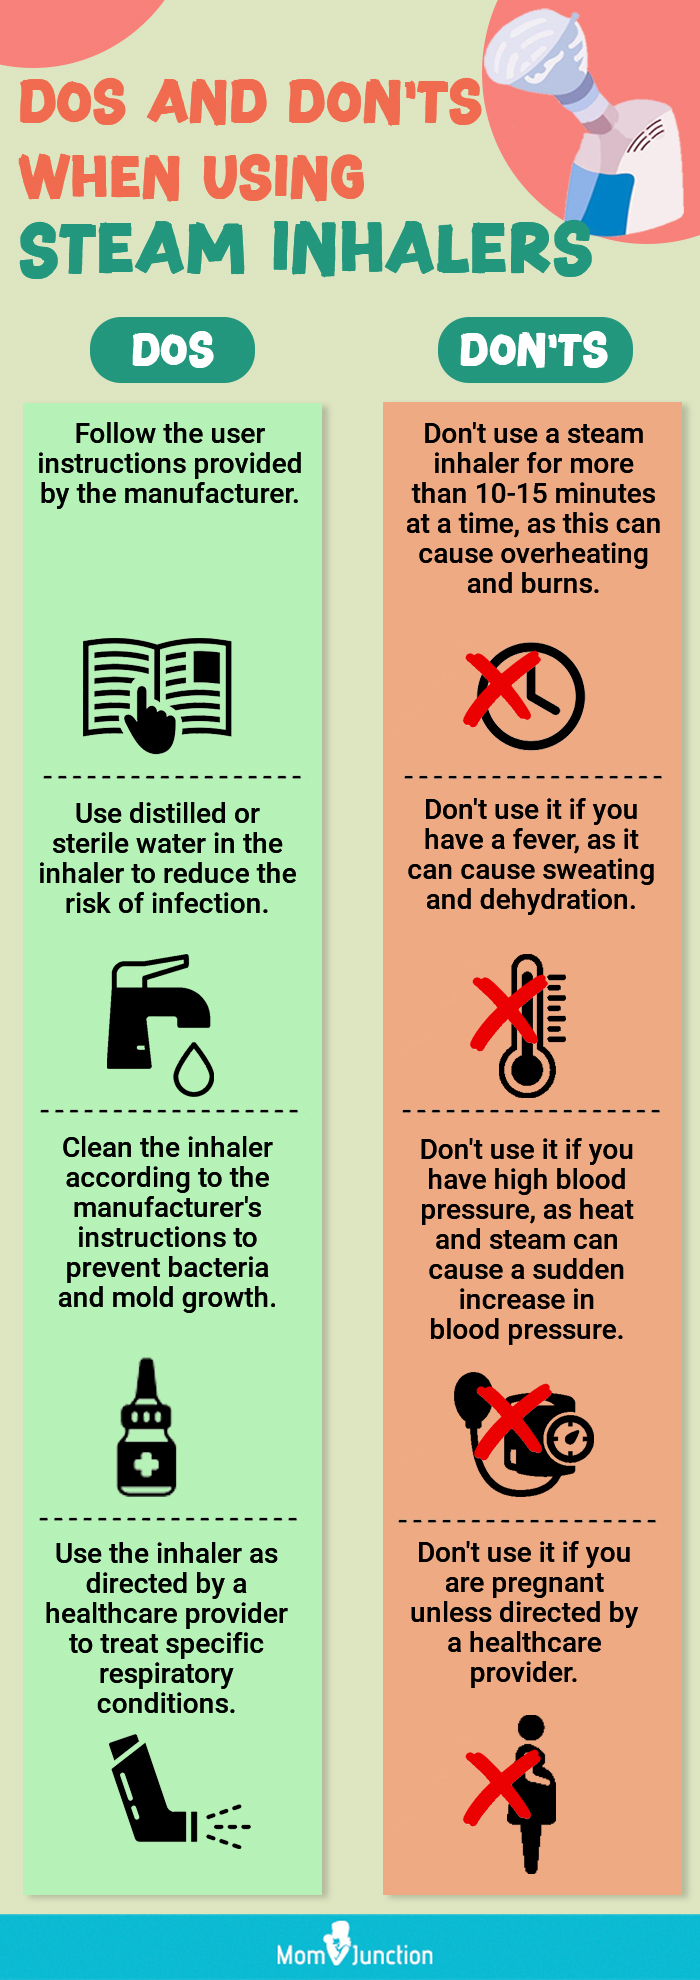 Dos and Don'ts When Using Steam Inhalers (infographic)